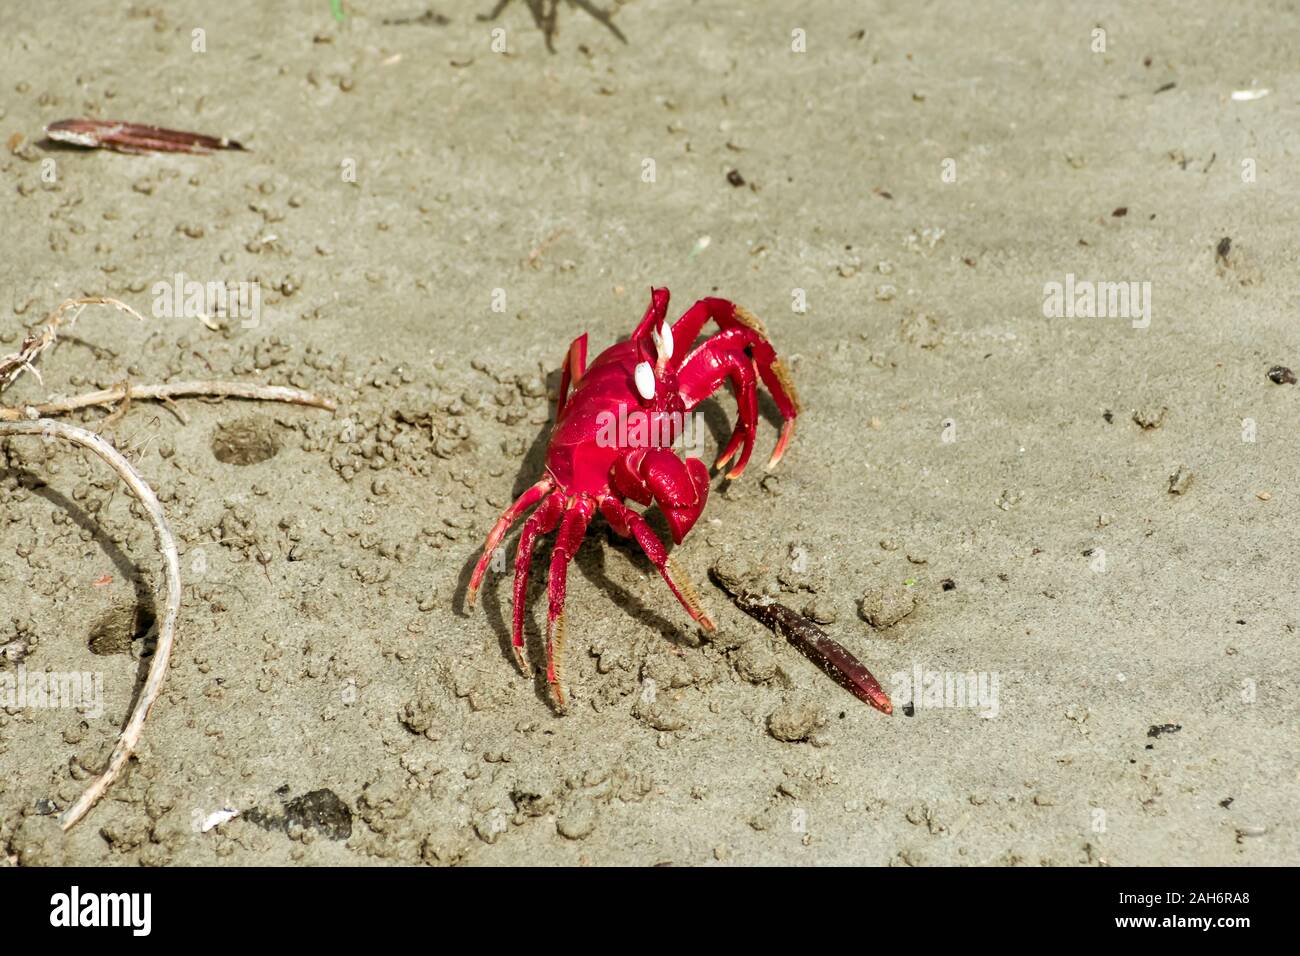 Christmas Island red crab (Gecarcoidea natalis), a Brachyura land crab or red crazy ant shellfish Gecarcinidae species that is endemic to Christmas Is Stock Photo